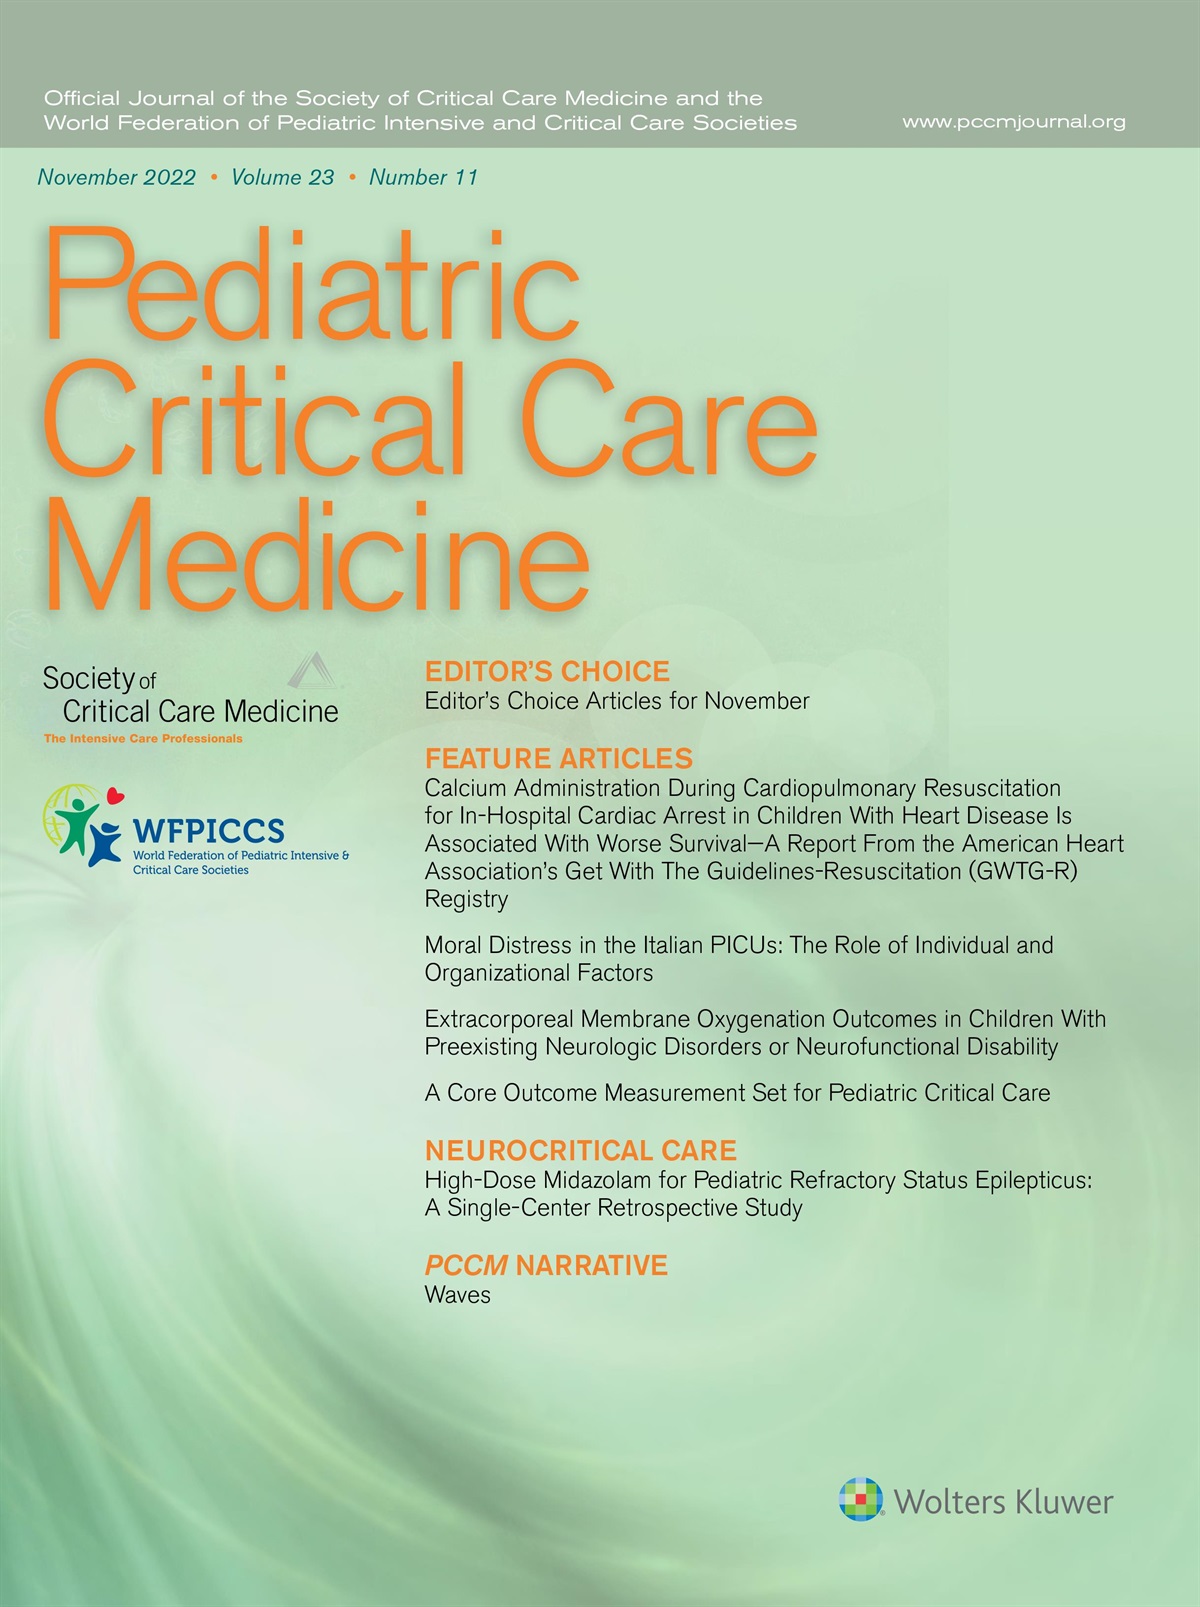 Navigating the Multiverse: Heterogeneity in Pediatric Burn Care in the United States*